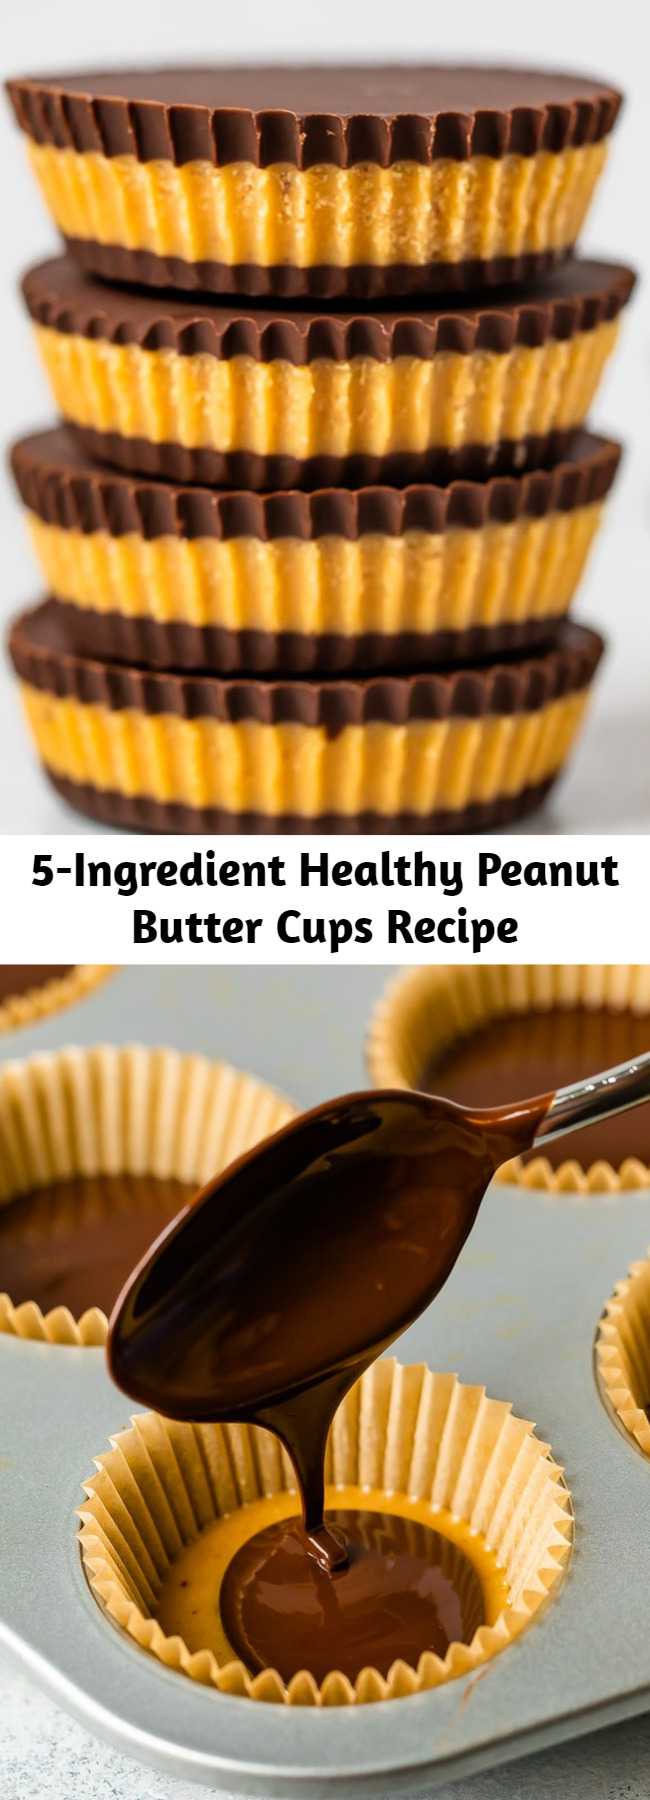 5-Ingredient Healthy Peanut Butter Cups Recipe - Make your own peanut butter cups using just 5 simple ingredients — dark chocolate chips, peanut butter, coconut oil, honey and sea salt.